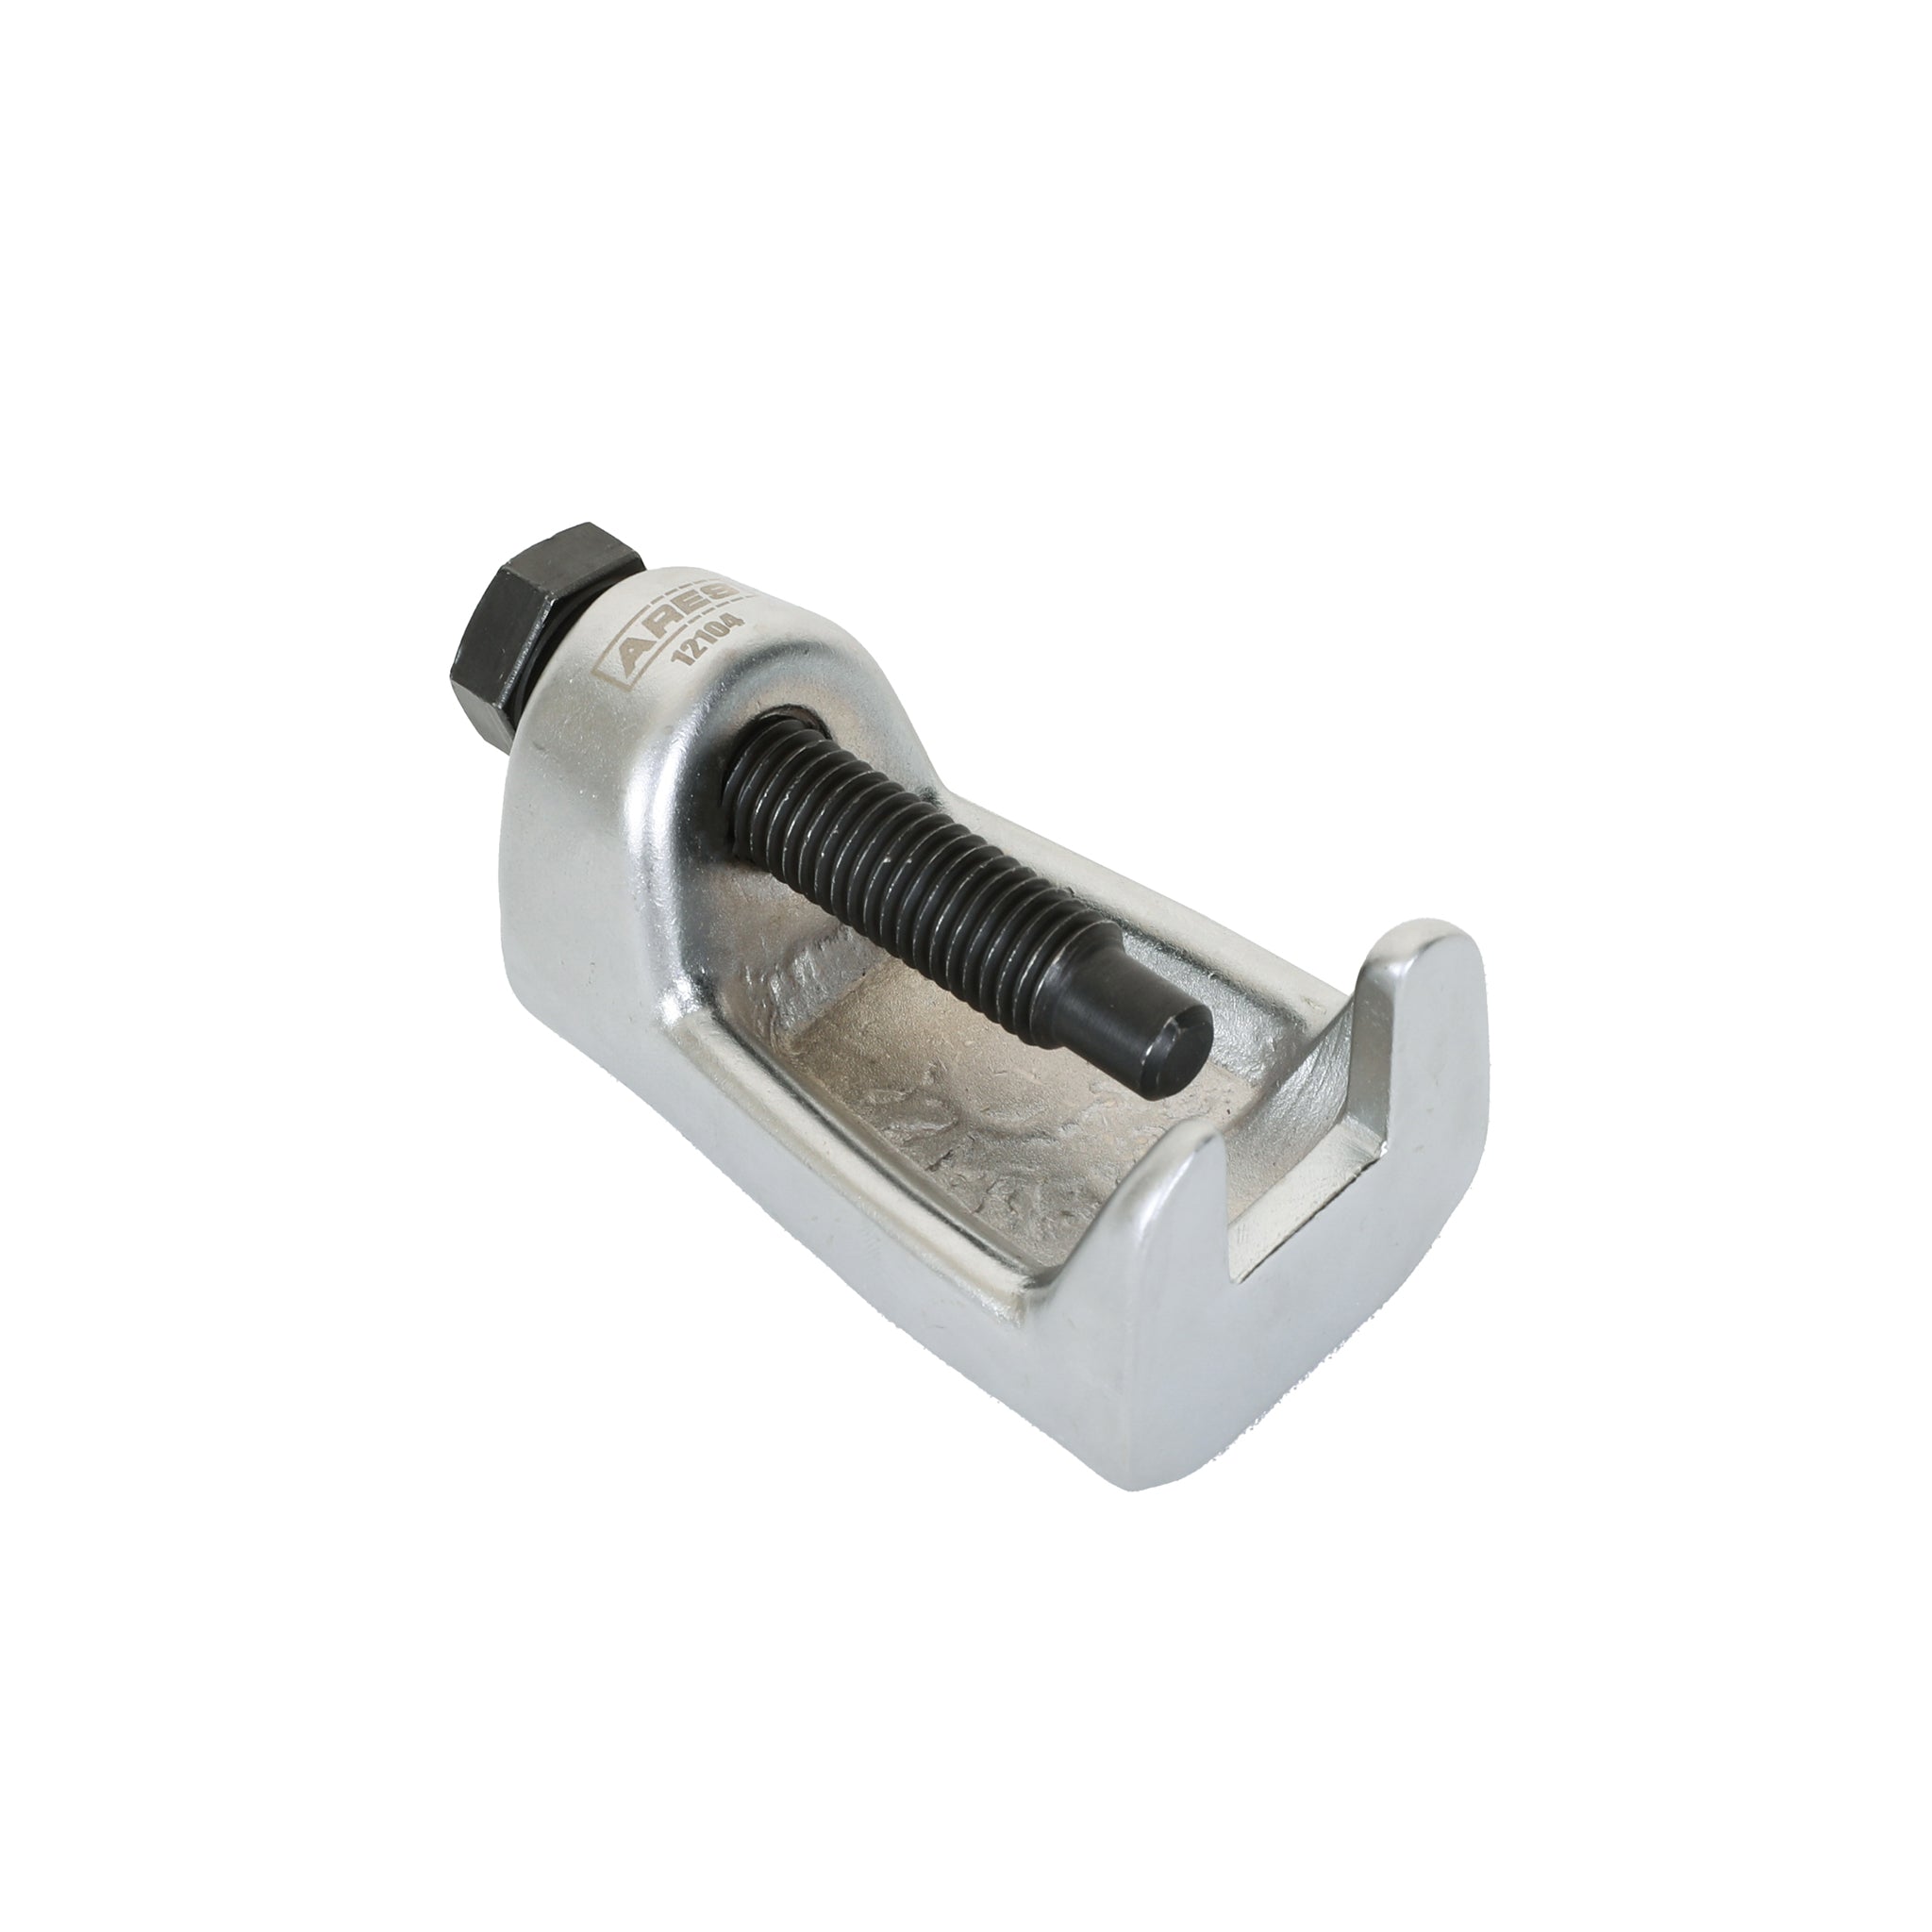 Silverline Tie Rod End Remover 19mm 680264 for sale online